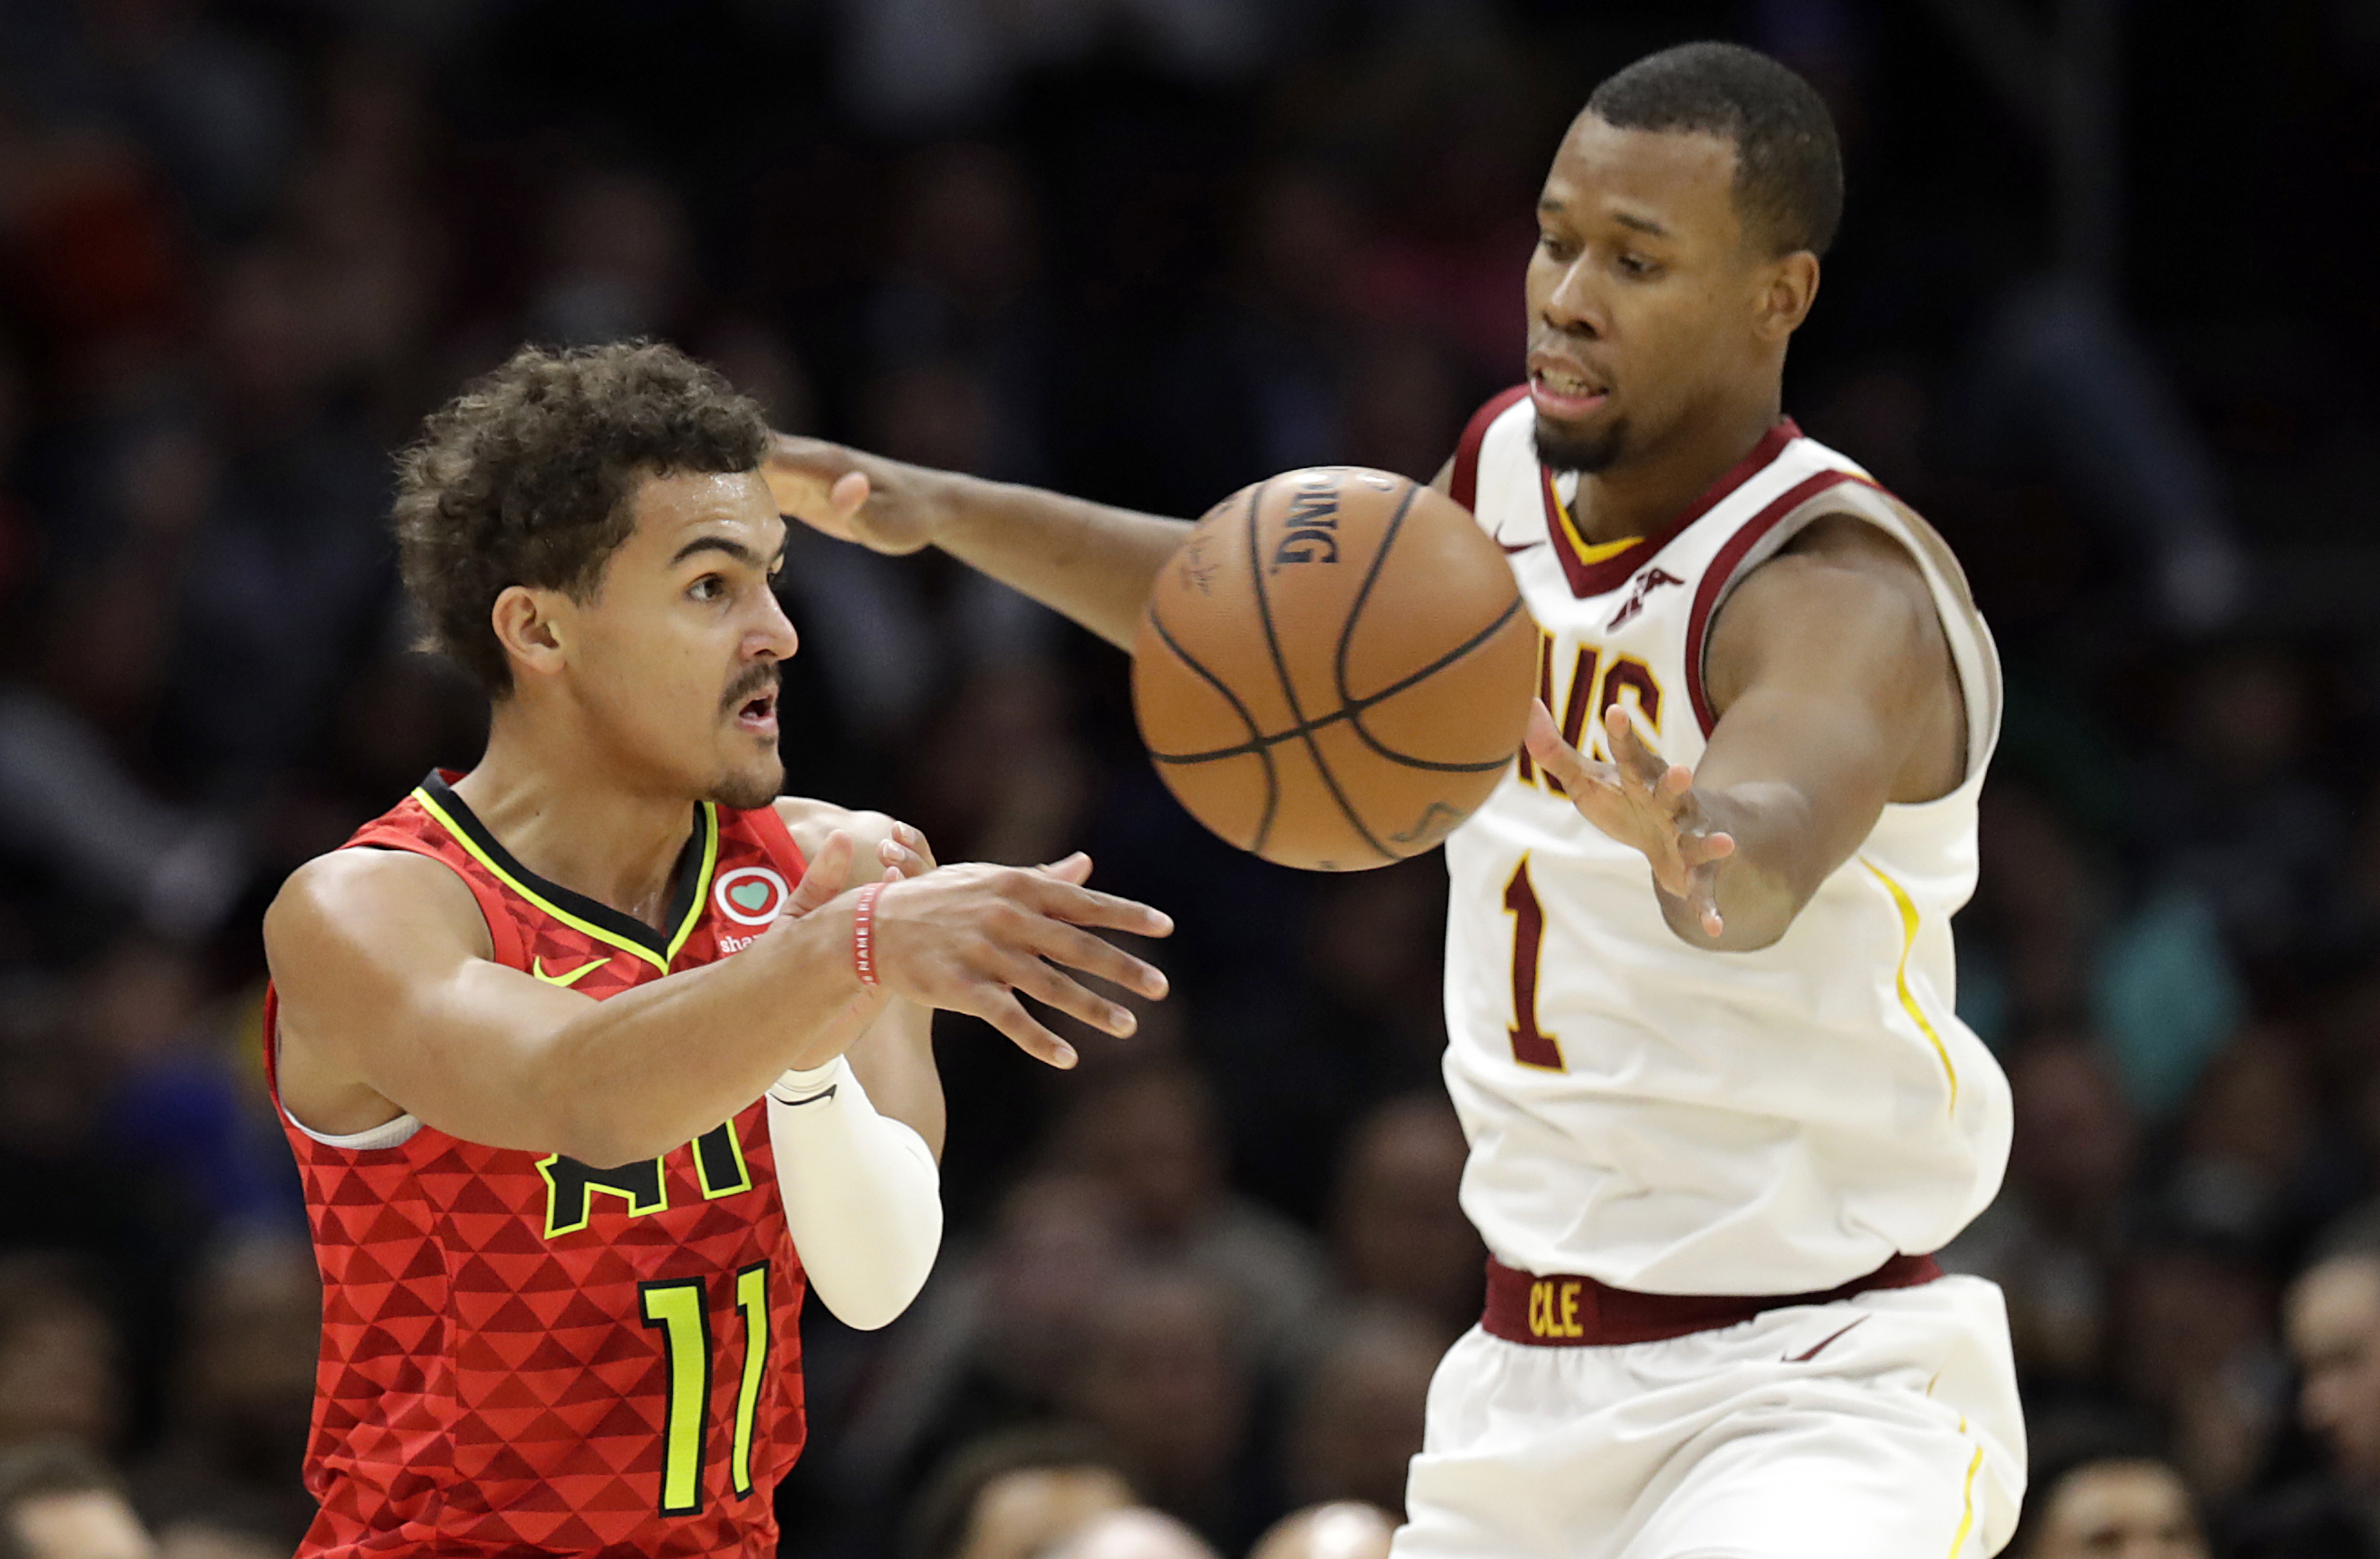 Cavaliers beat Hawks to get first win after firing Lue